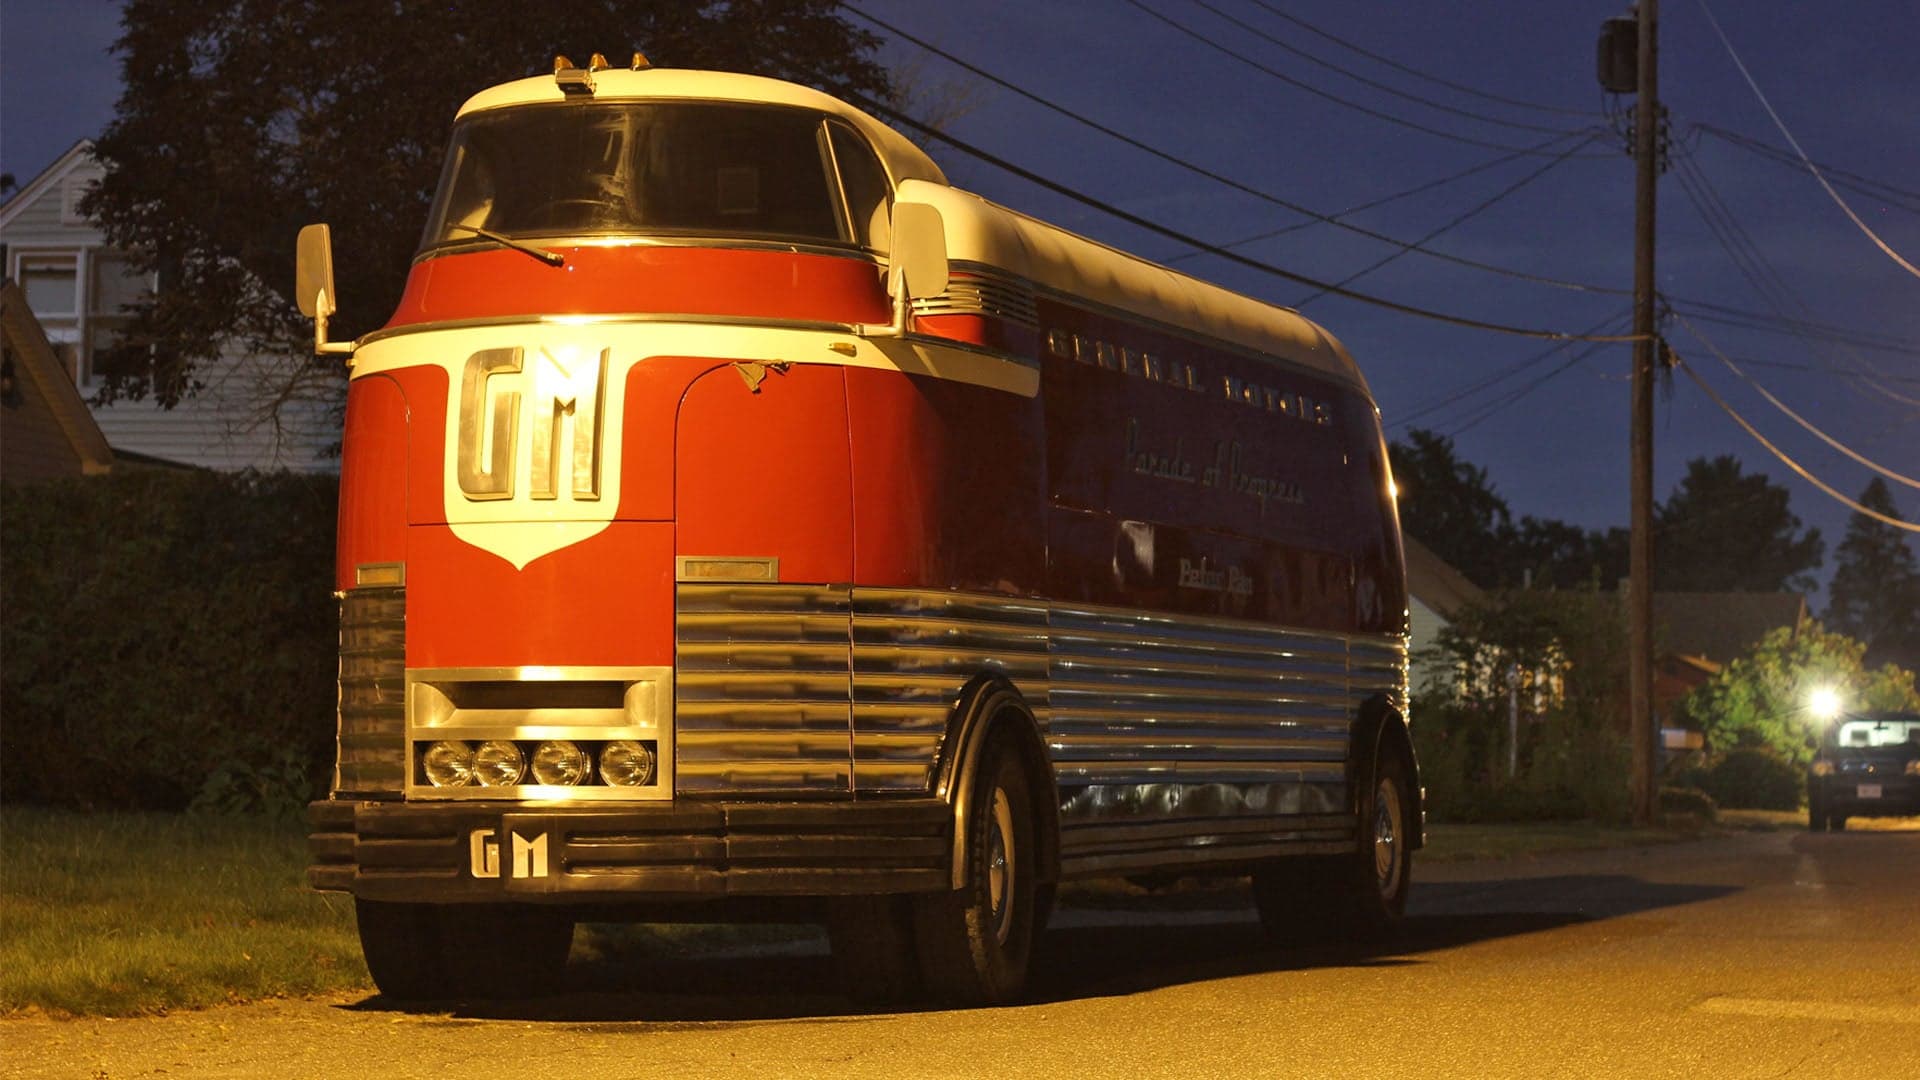 Ultra-Rare 1930s GM Futurliner Seen Street Parked in Random Small Town—and We’ve Got Answers